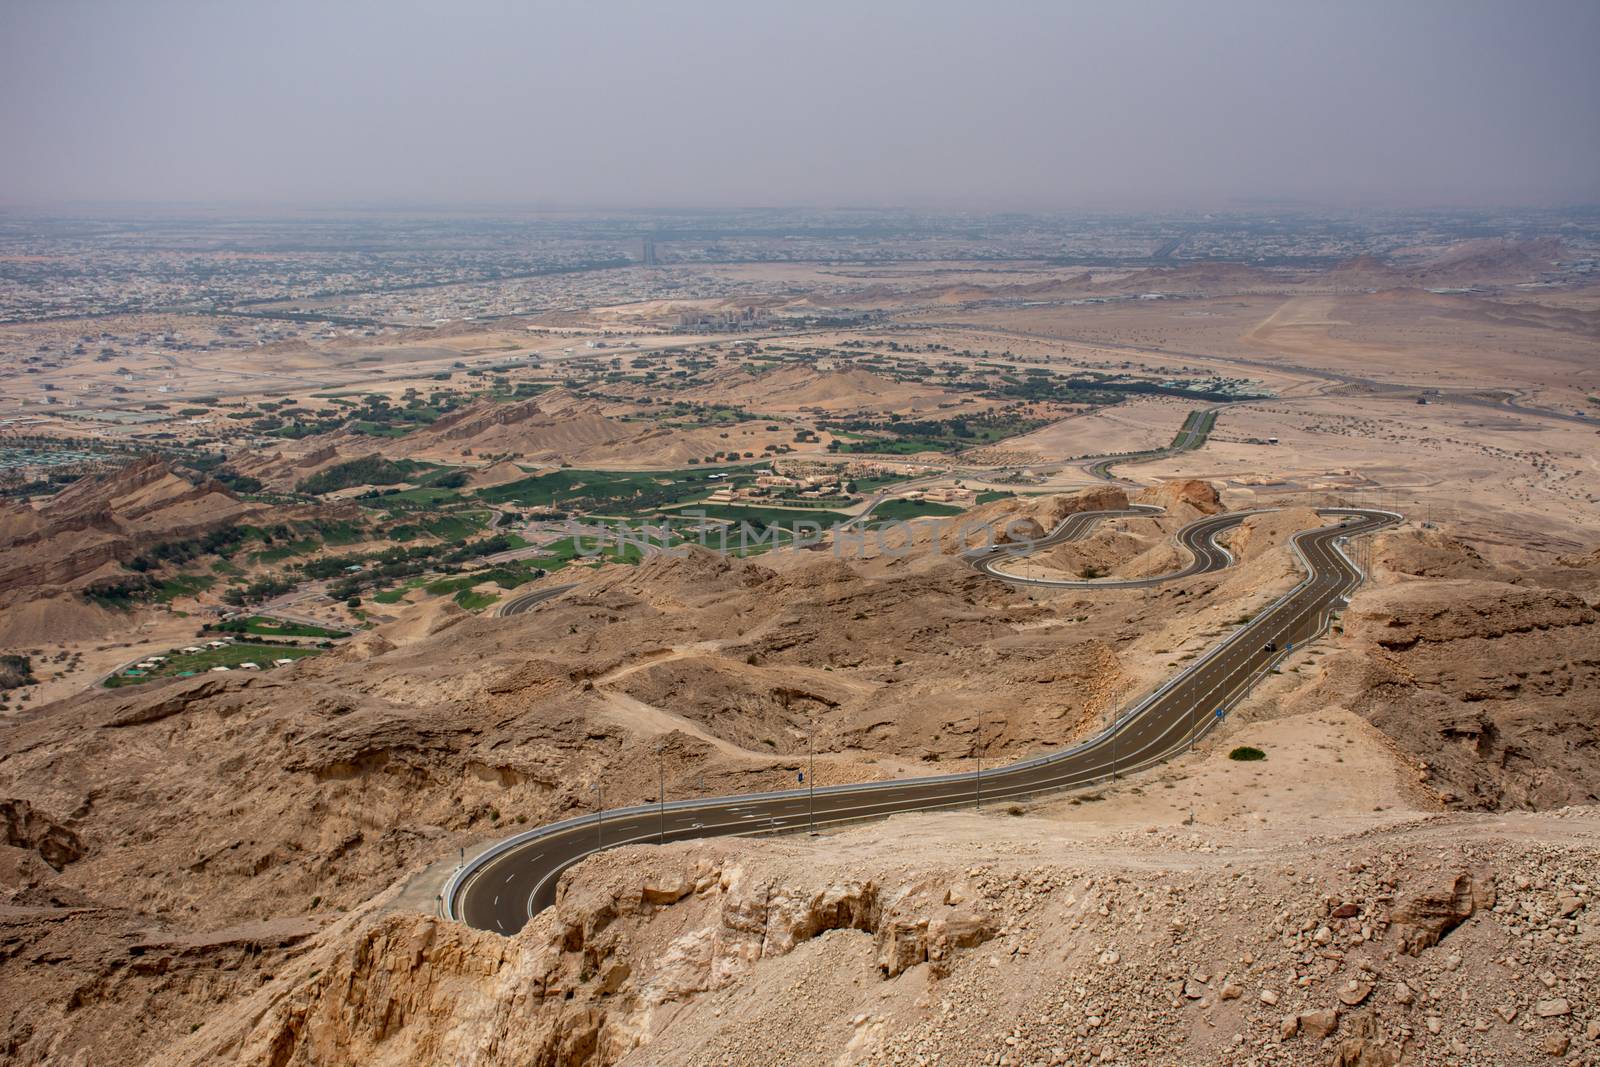 Viewpoint of twisted highway on Jebal Hafeet (aka Jebel Hafit) and Green Mubazzarah Park in Al Ain, UAE.